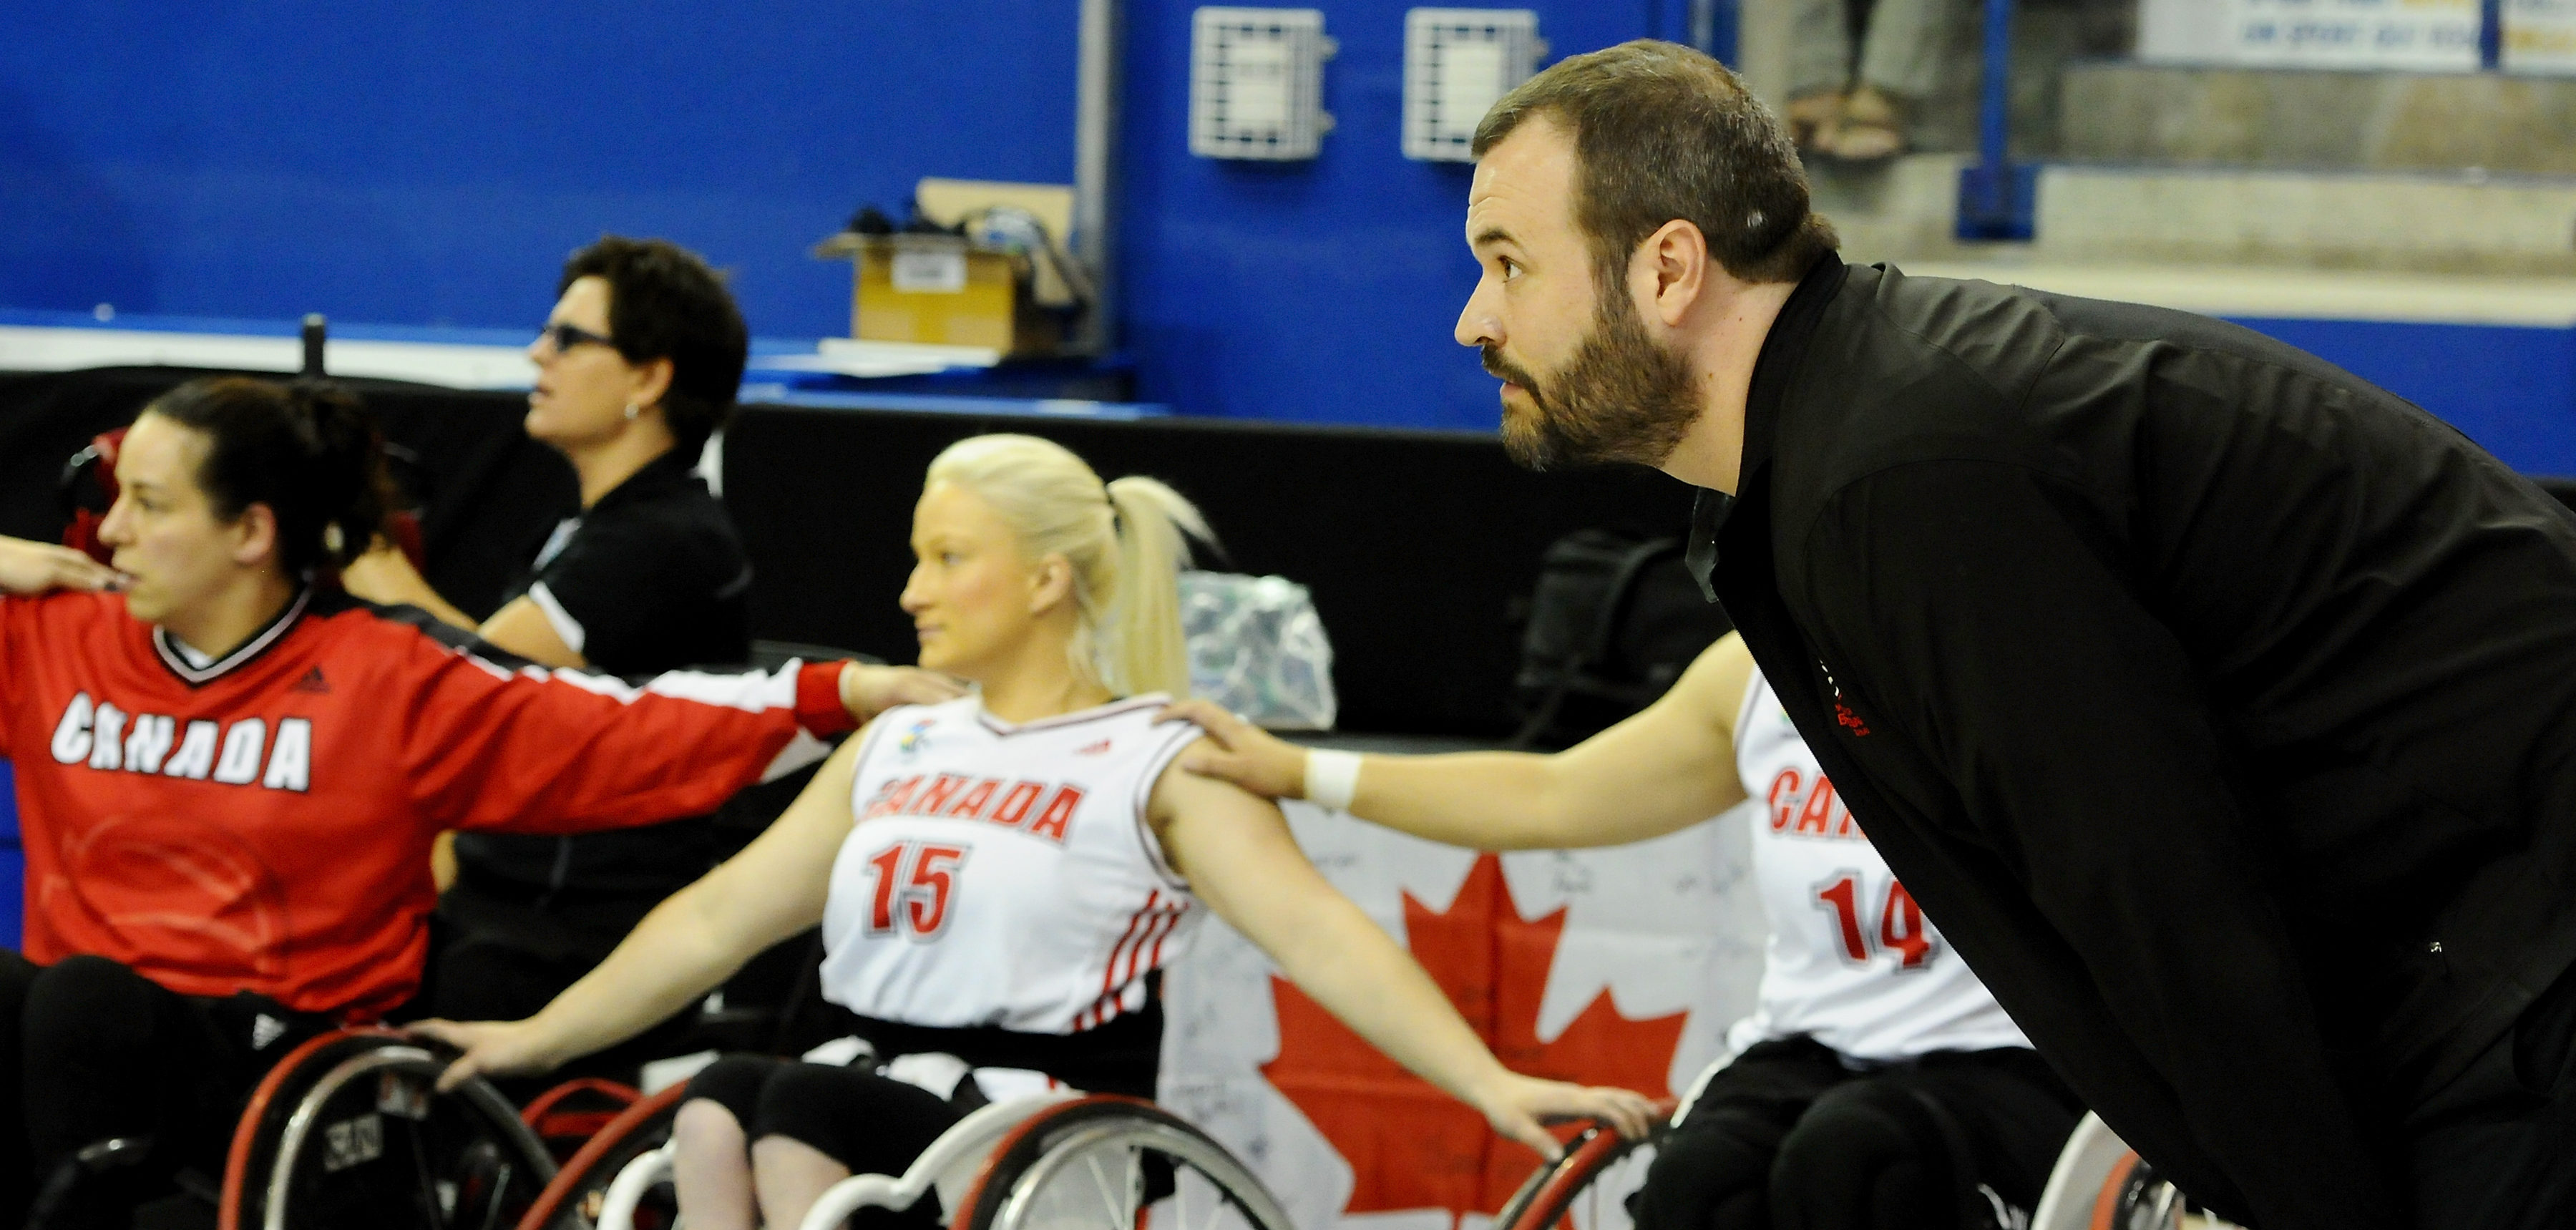 Head Coach Bill Johnson of Team Canada looks on anxiously in the dying seconds of a close game against Team Germany in the Gold Medal Game at the 2014 Women's World Wheelchair Basketball Championships in Toronto, Ontario, Canada.